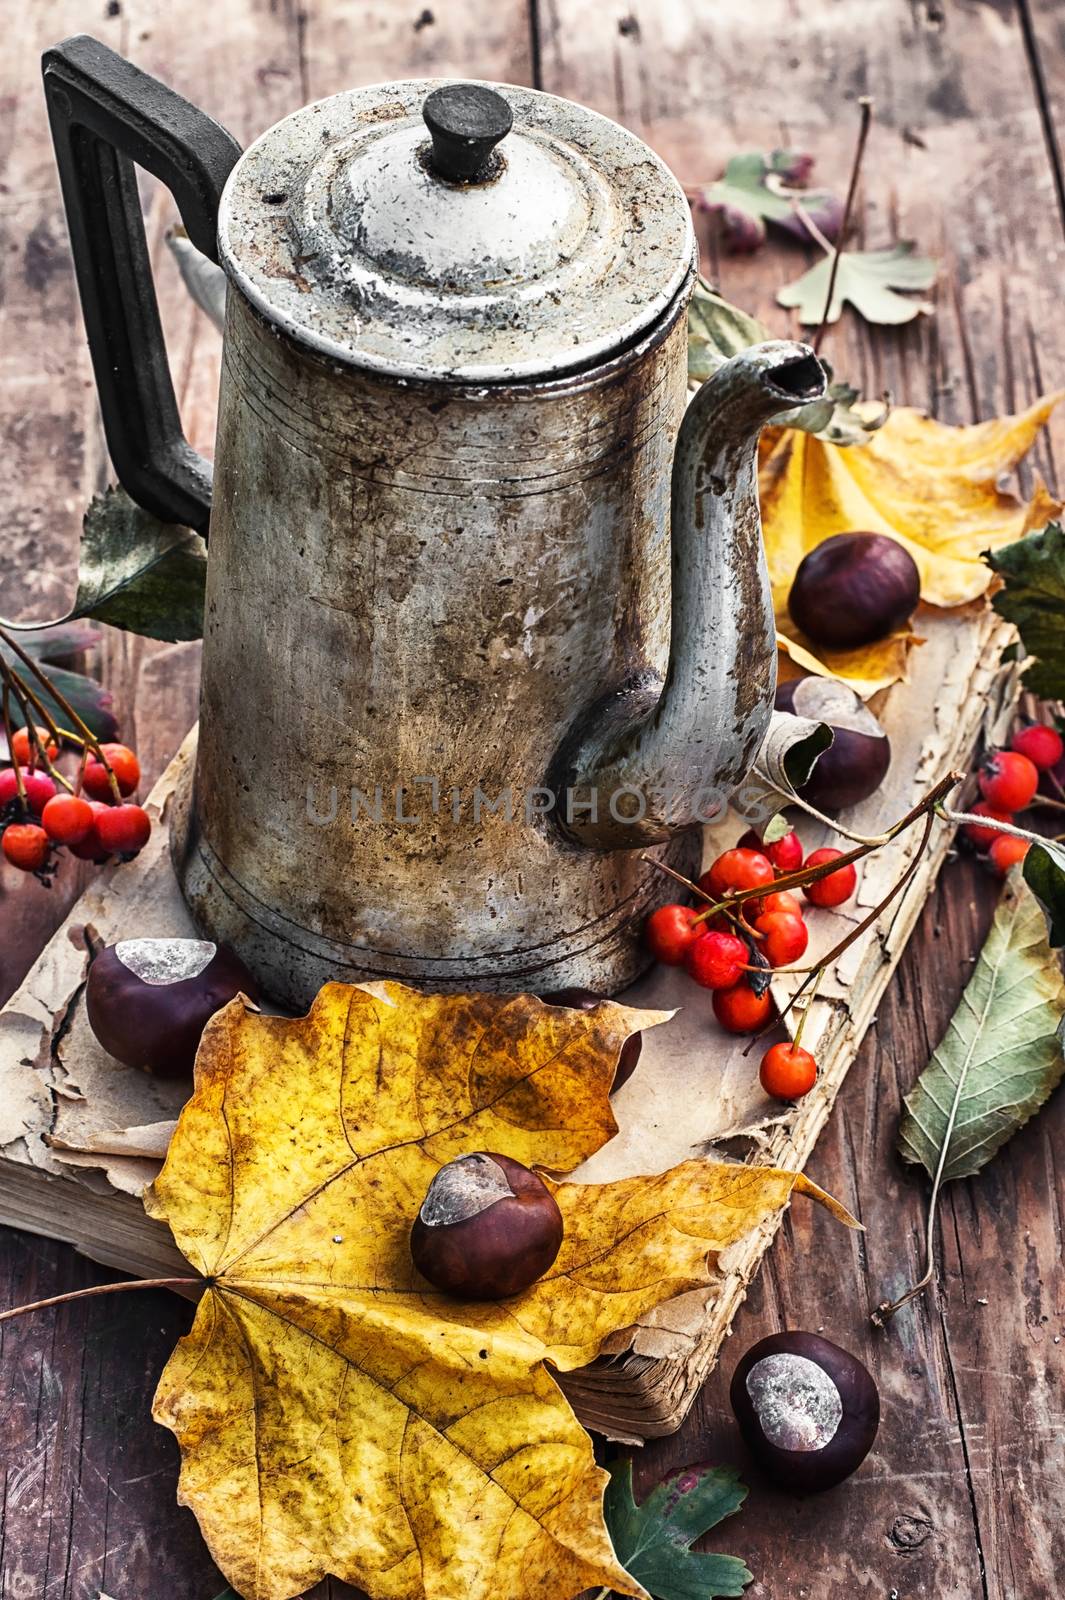 old book on wooden table on background of the kettle strewn with autumn leaves and Rowan.Photo tinted.Selective focus